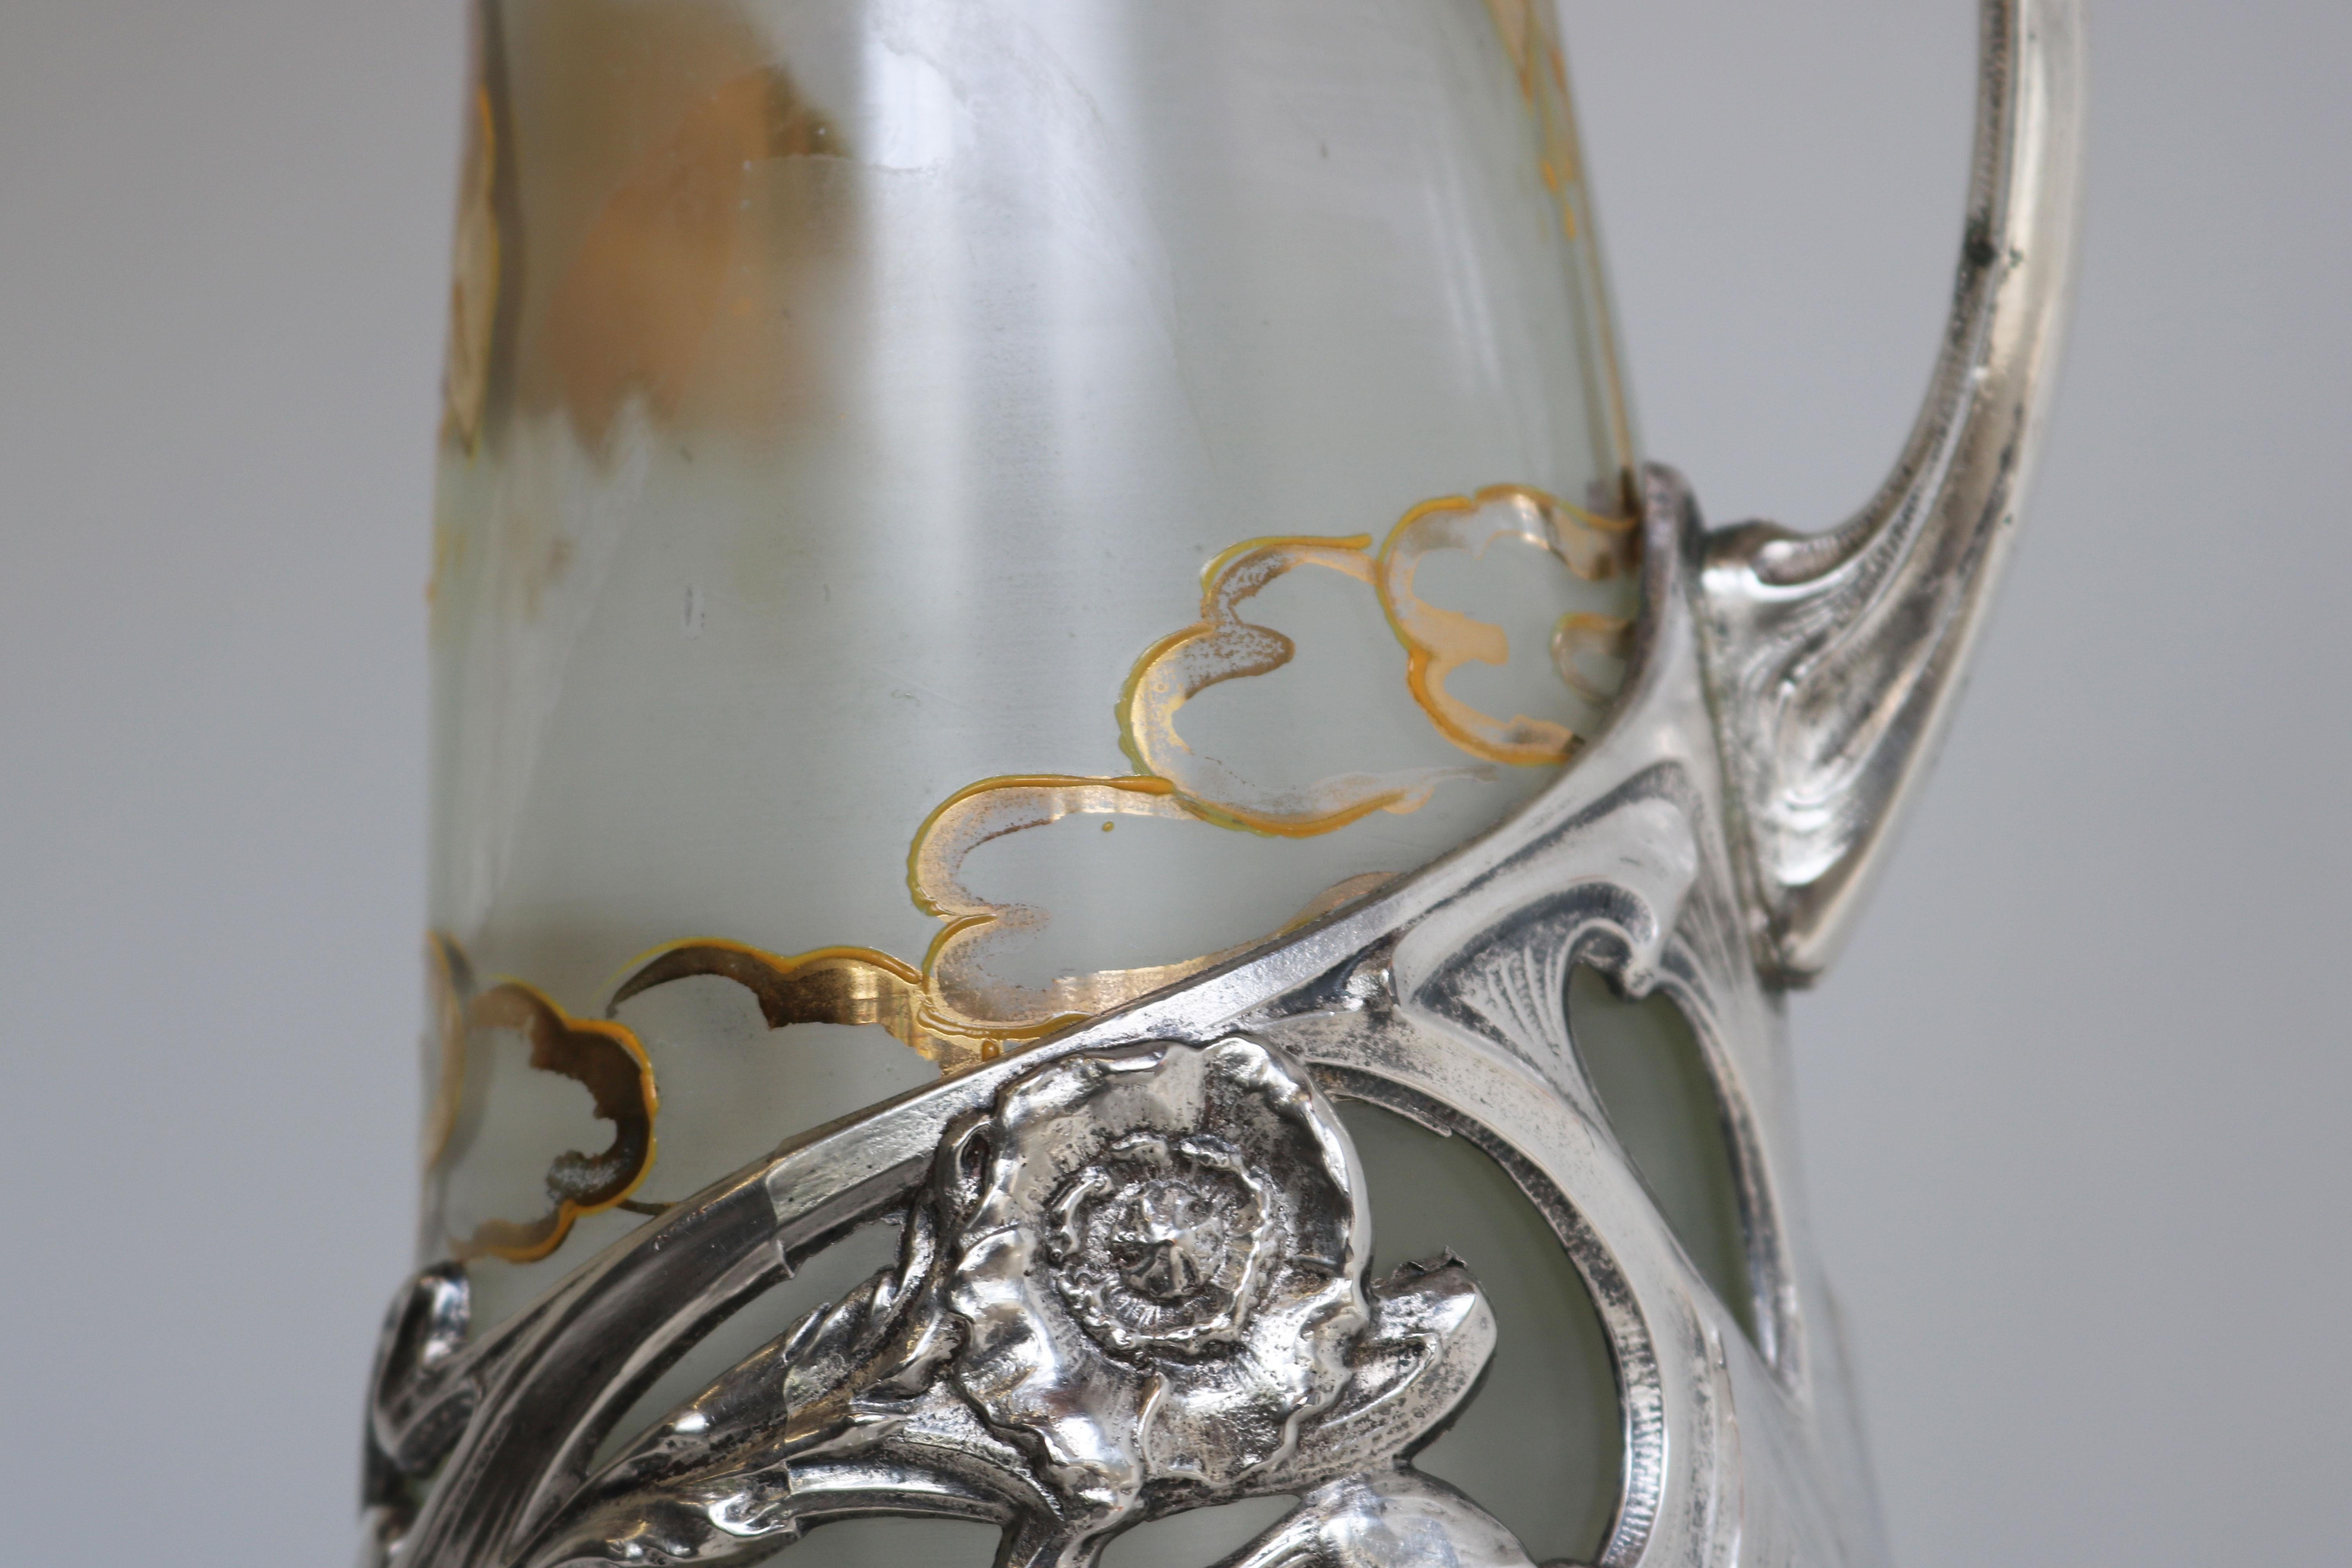 Exquisite French Art Nouveau Decanter / Pitcher by J. Barian Silver Glass 1900 For Sale 2